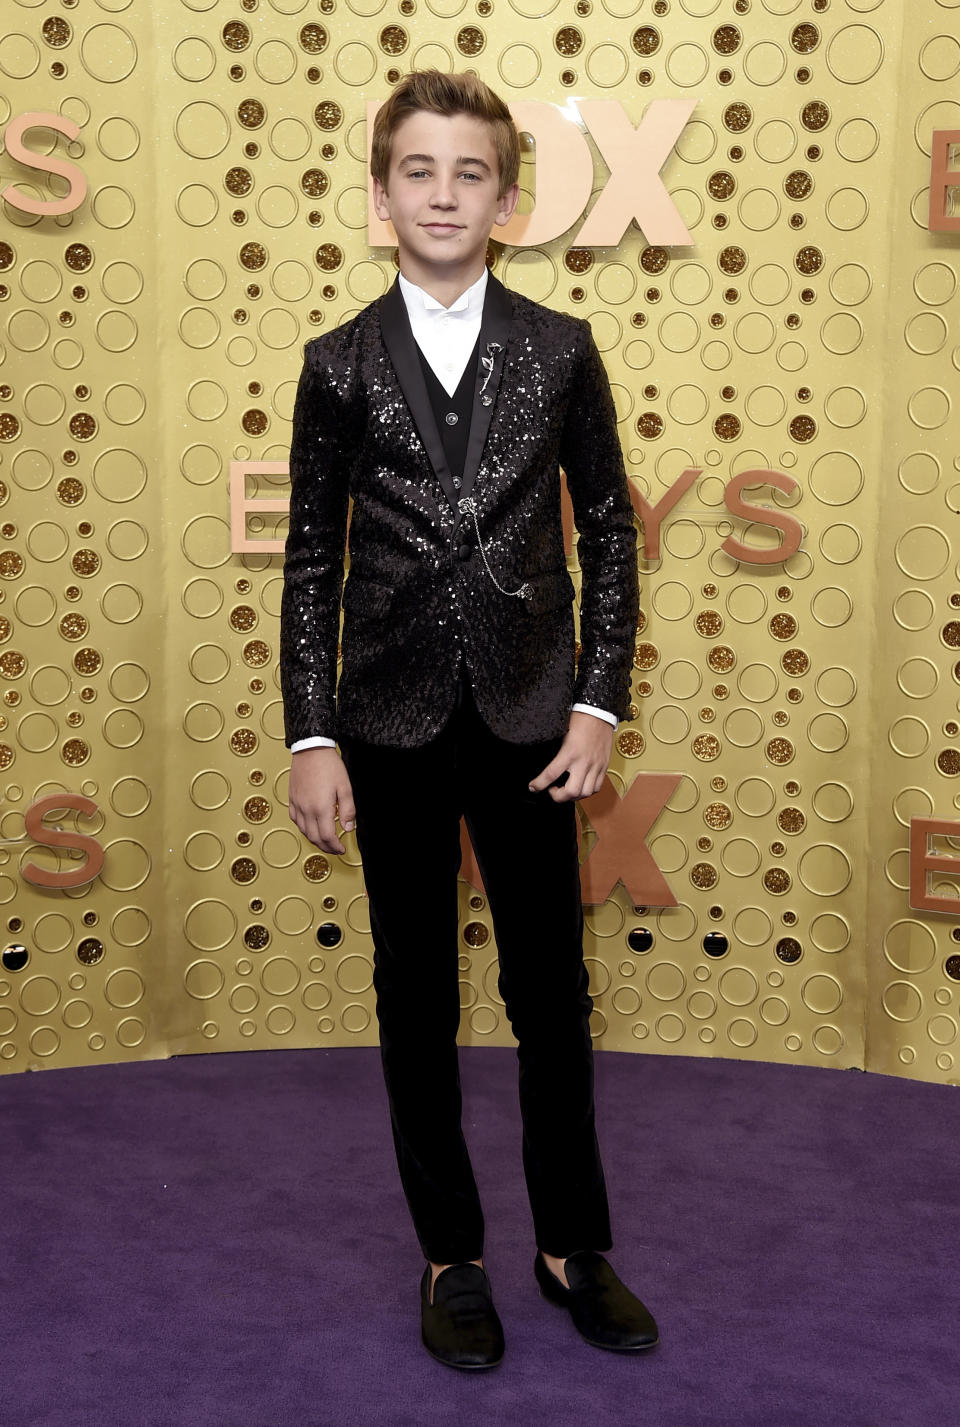 Parker Bates arrives at the 71st Primetime Emmy Awards on Sunday, Sept. 22, 2019, at the Microsoft Theater in Los Angeles. (Photo by Jordan Strauss/Invision/AP)